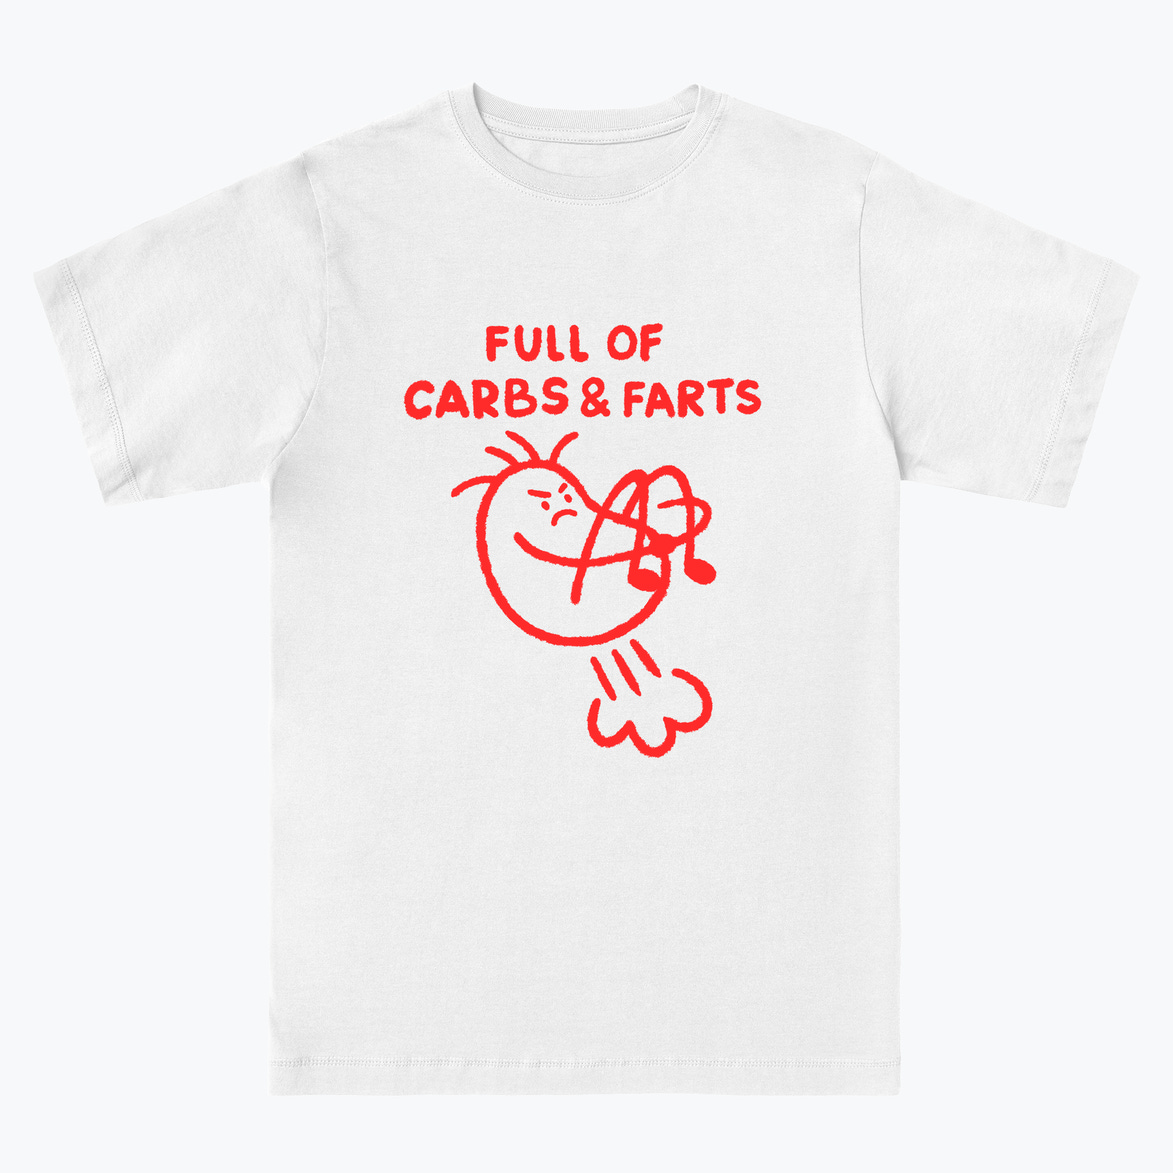 Carbs & farts - Front of Essentials Classic Tee in White